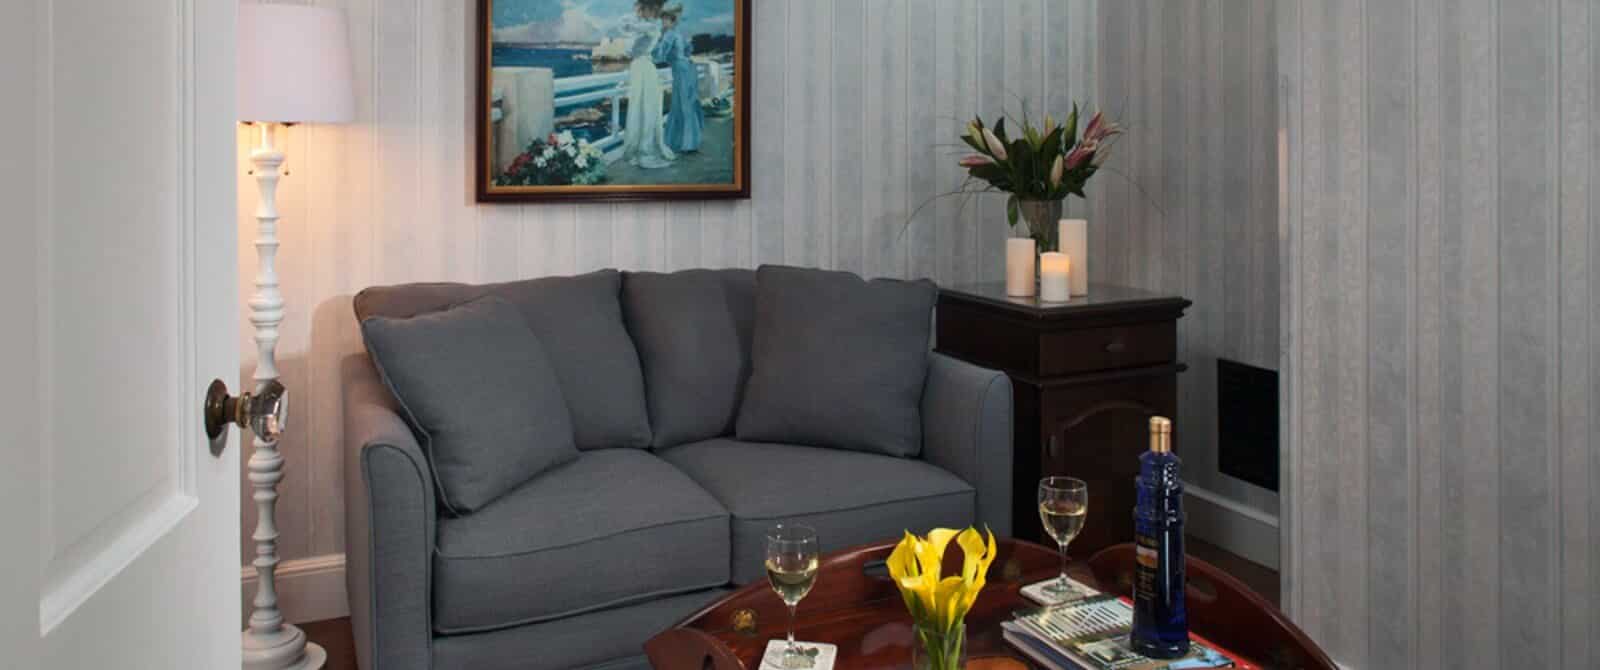 Corner of a bedroom with loveseat, coffee table and side table with candles and vase of flowers